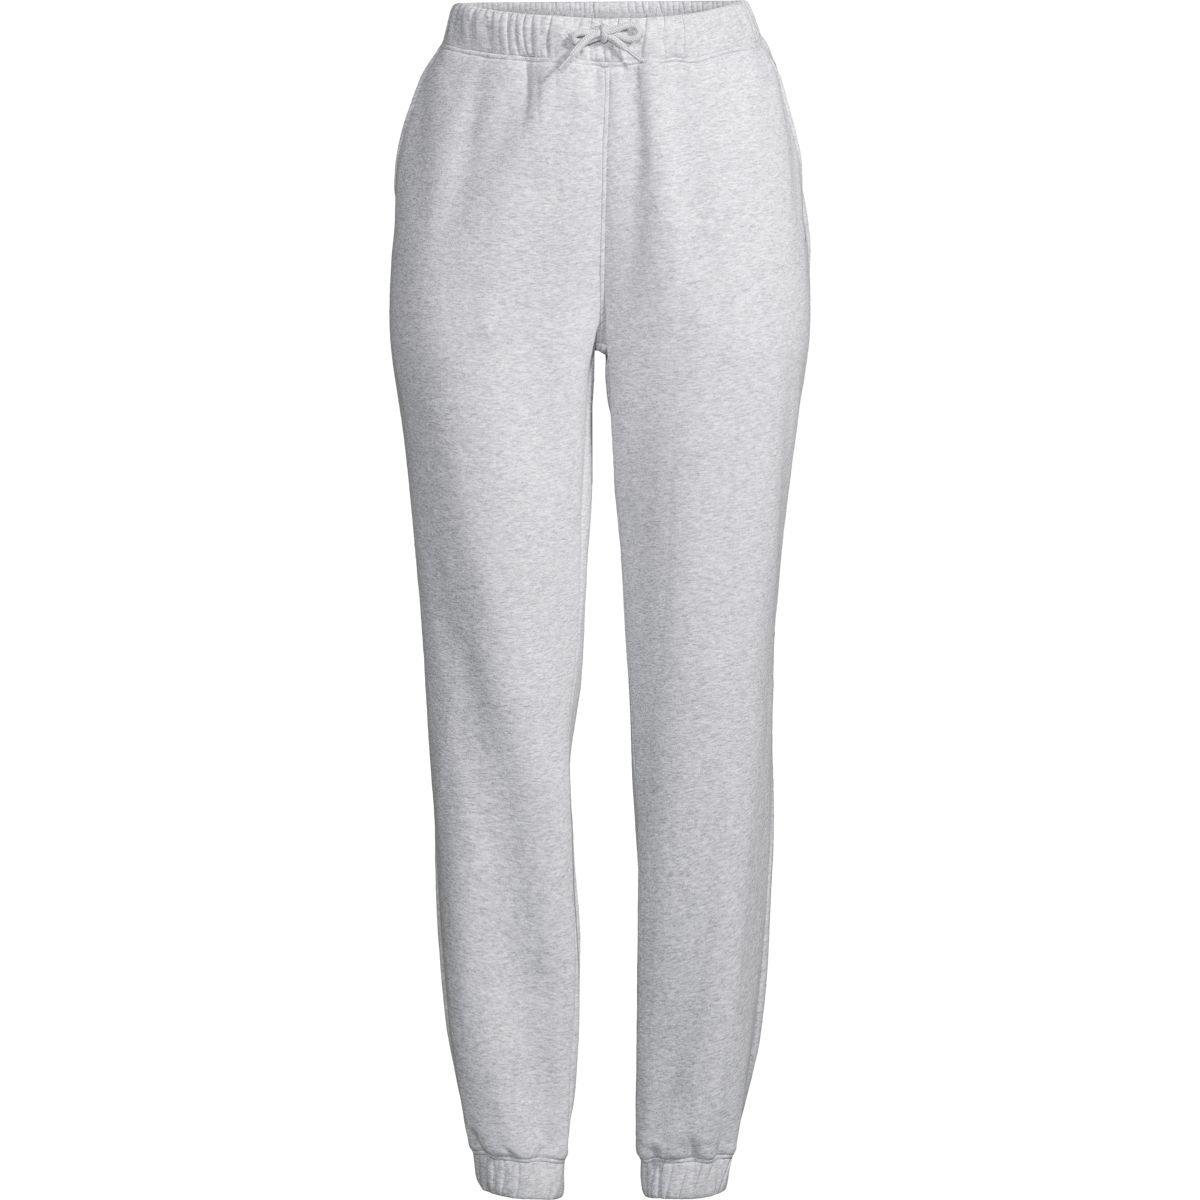 Women's High-Rise Wide Leg French Terry Sweatpants - Wild Fable™ Heather  Gray S